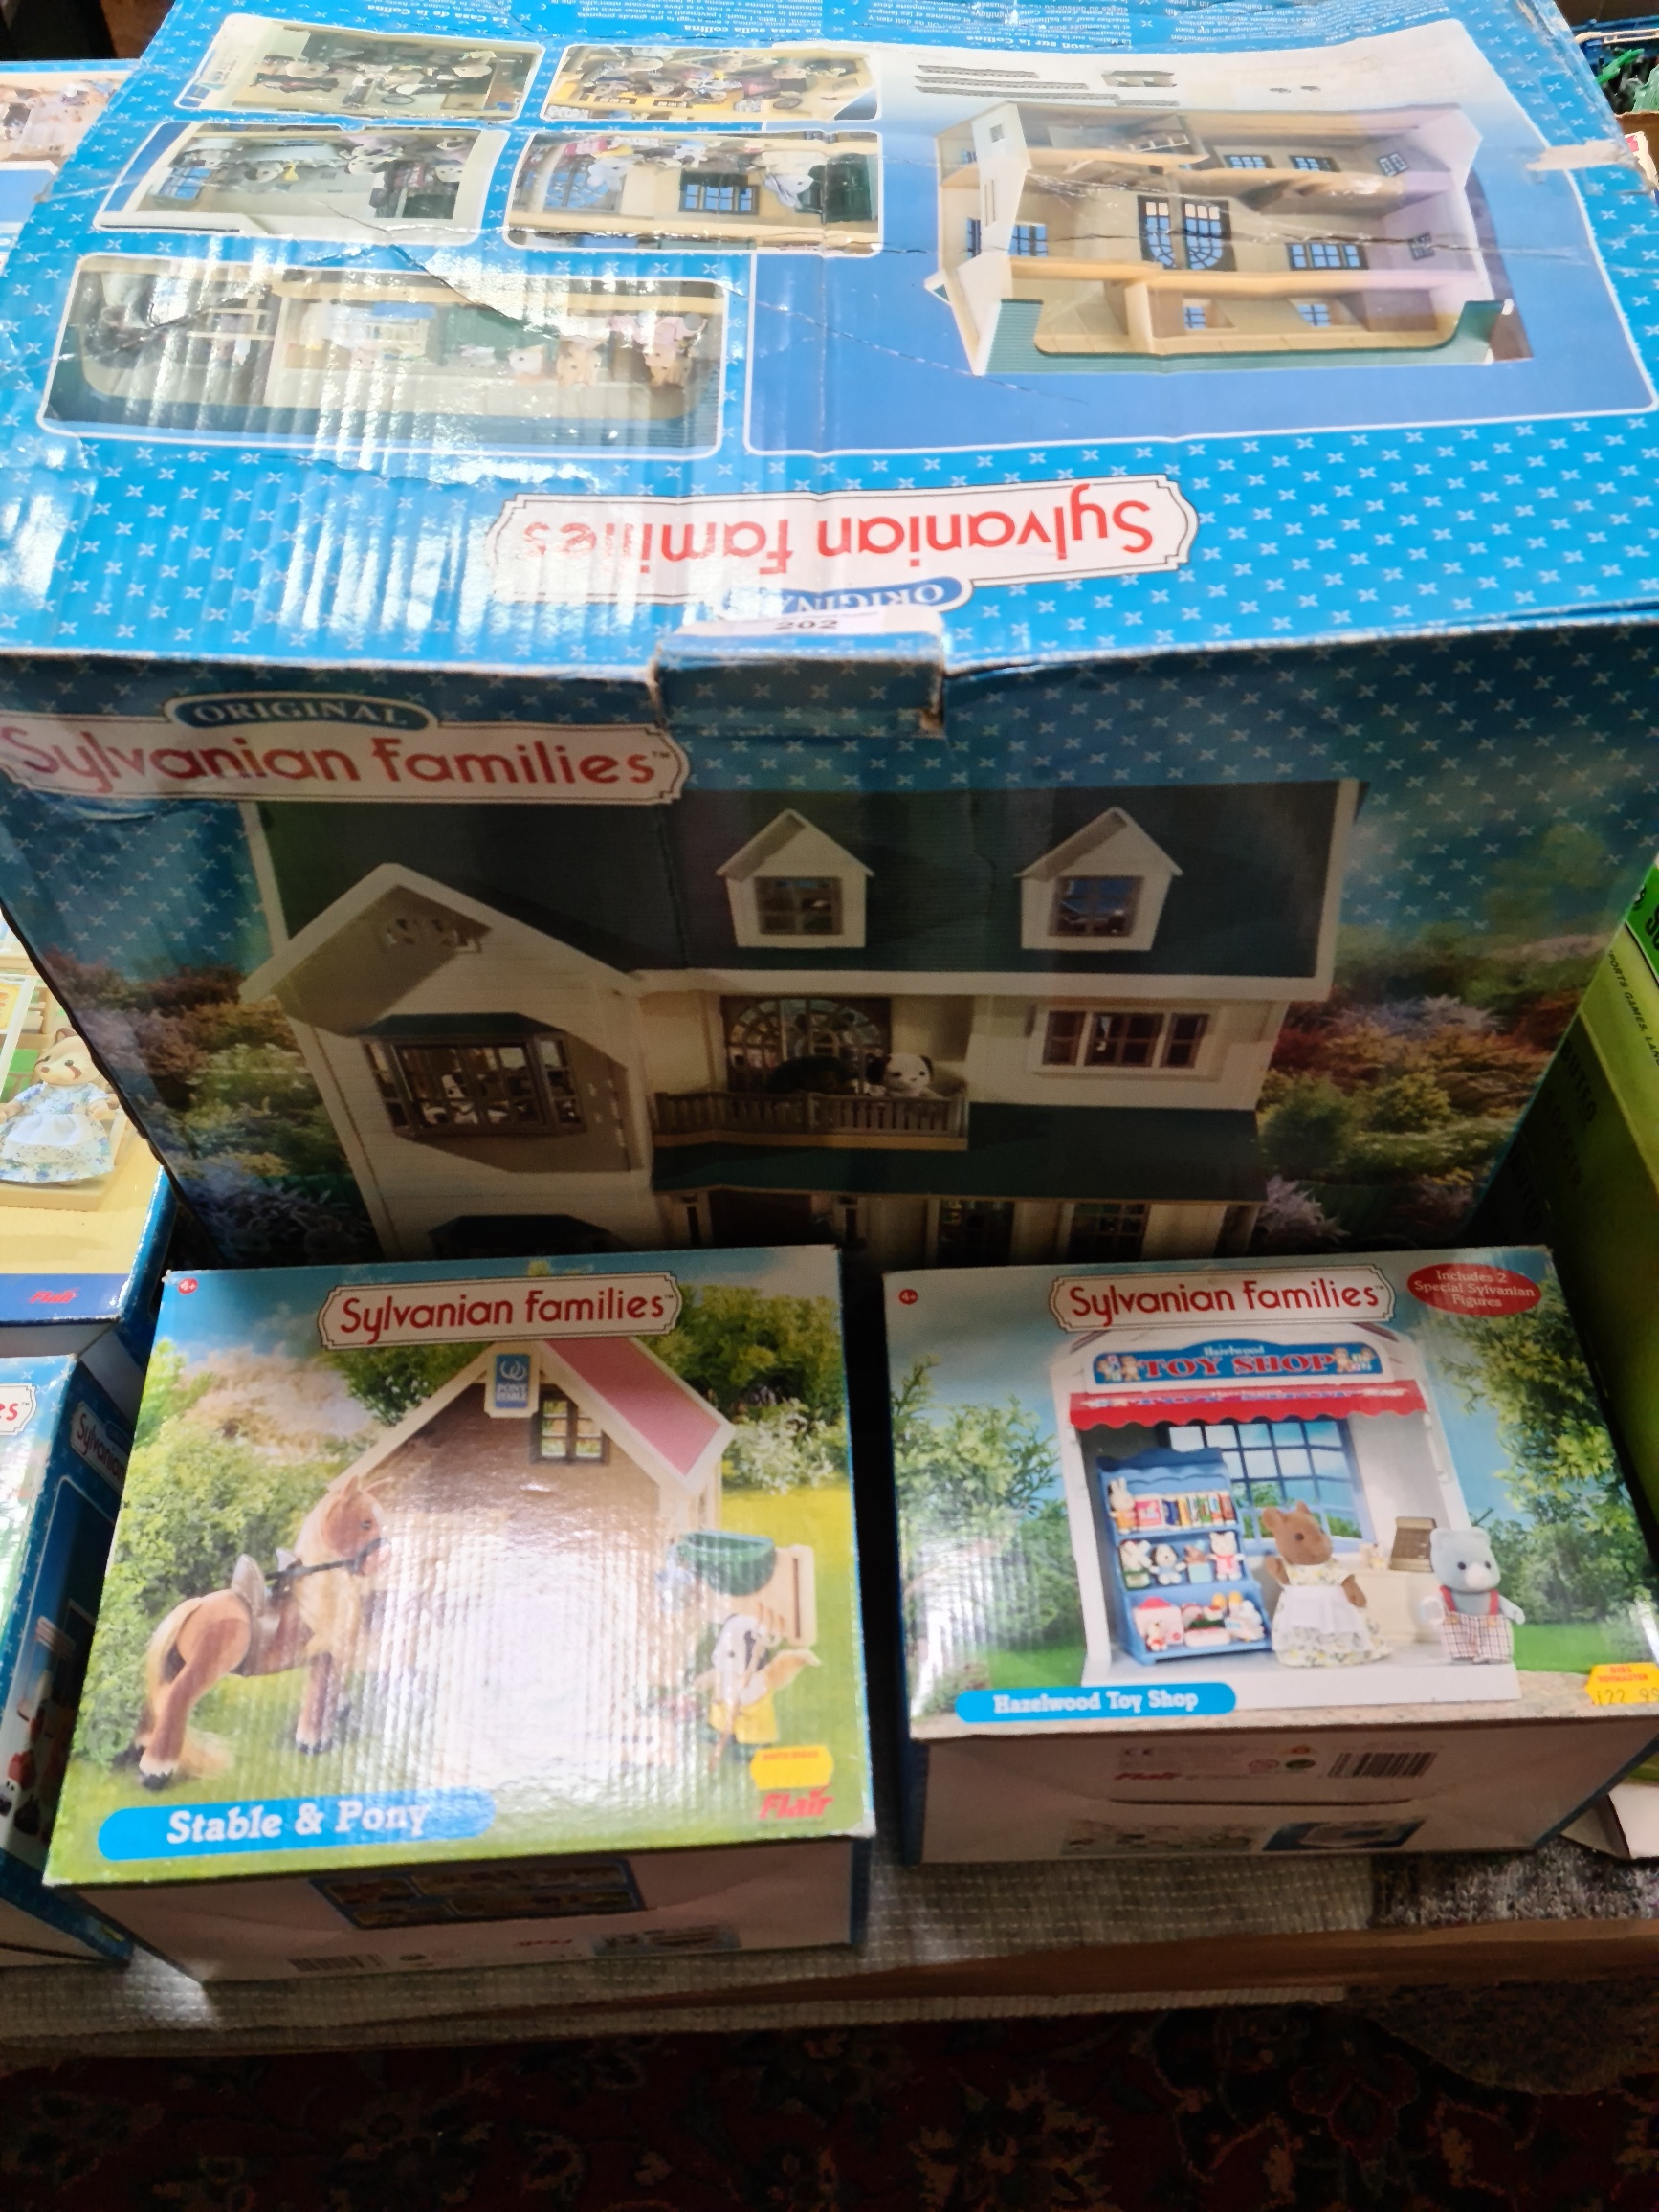 Boxed Sylvanian families toy sets; House on the Hill, Stable & Pony, and Hazelwood Toy Shop.